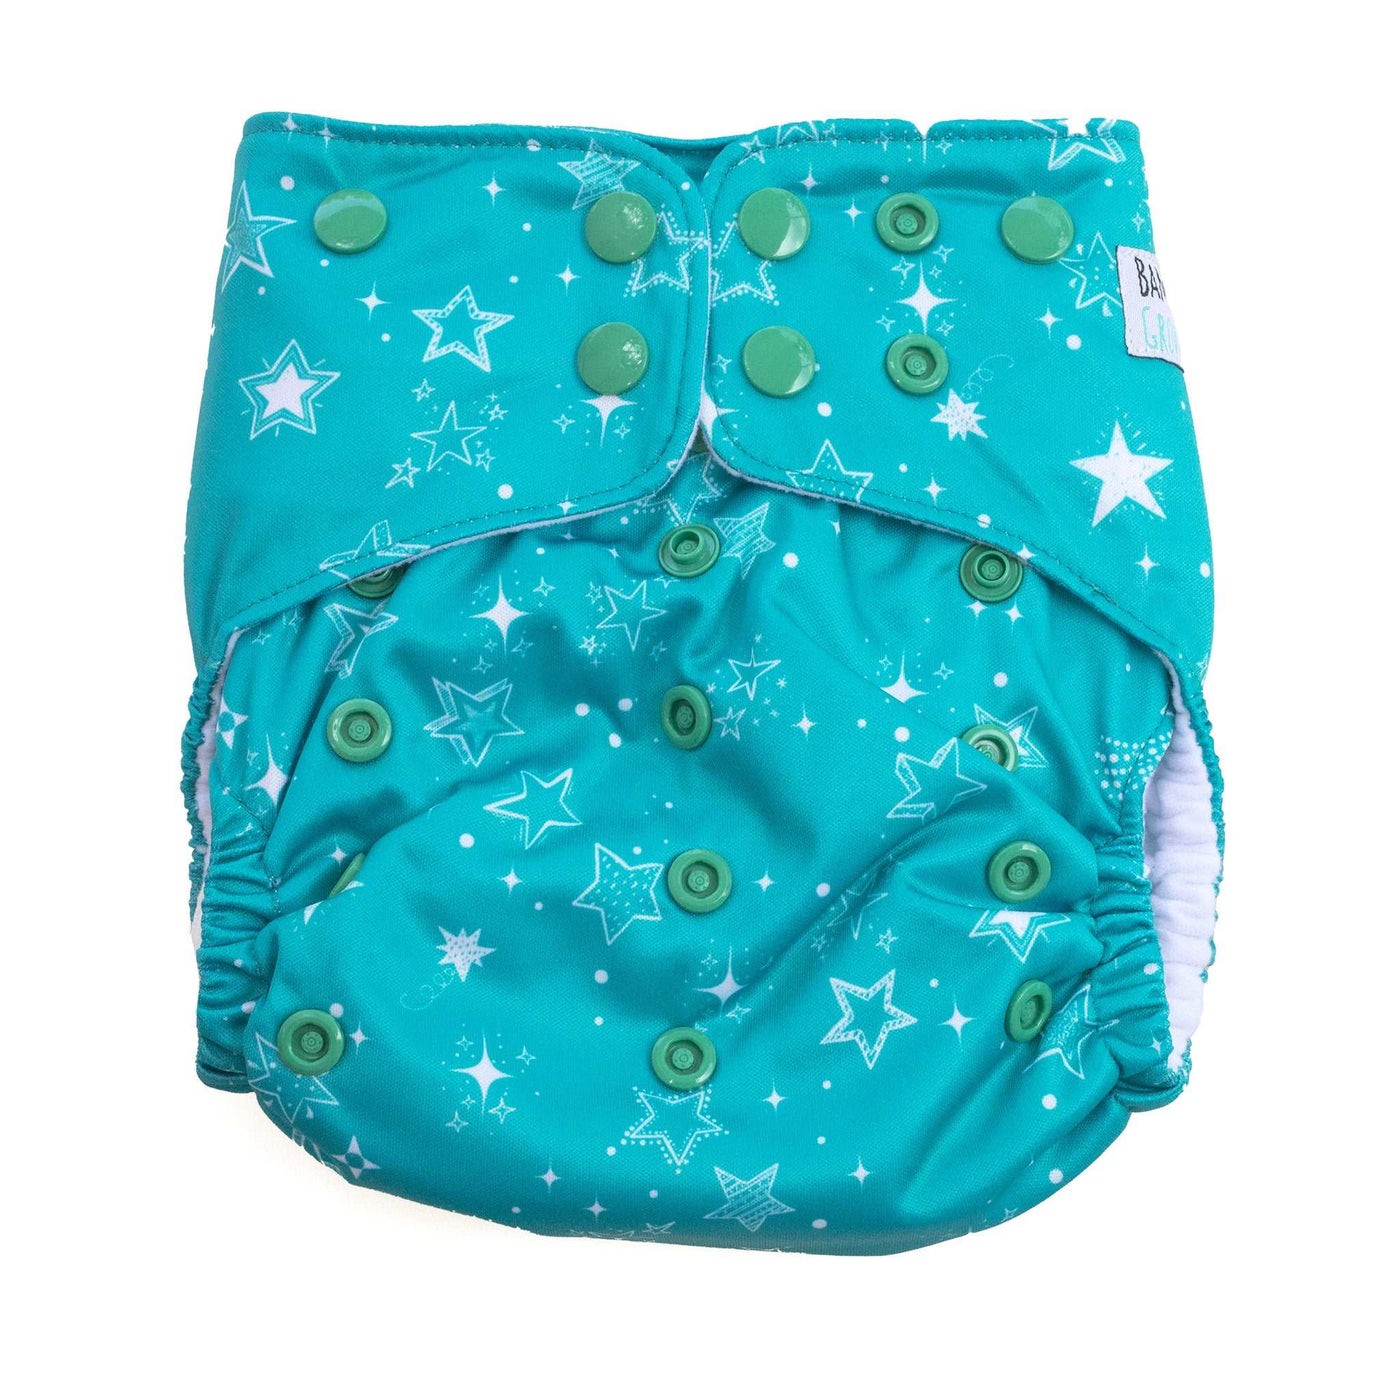 Most absorbent bamboo inserts for cloth nappies